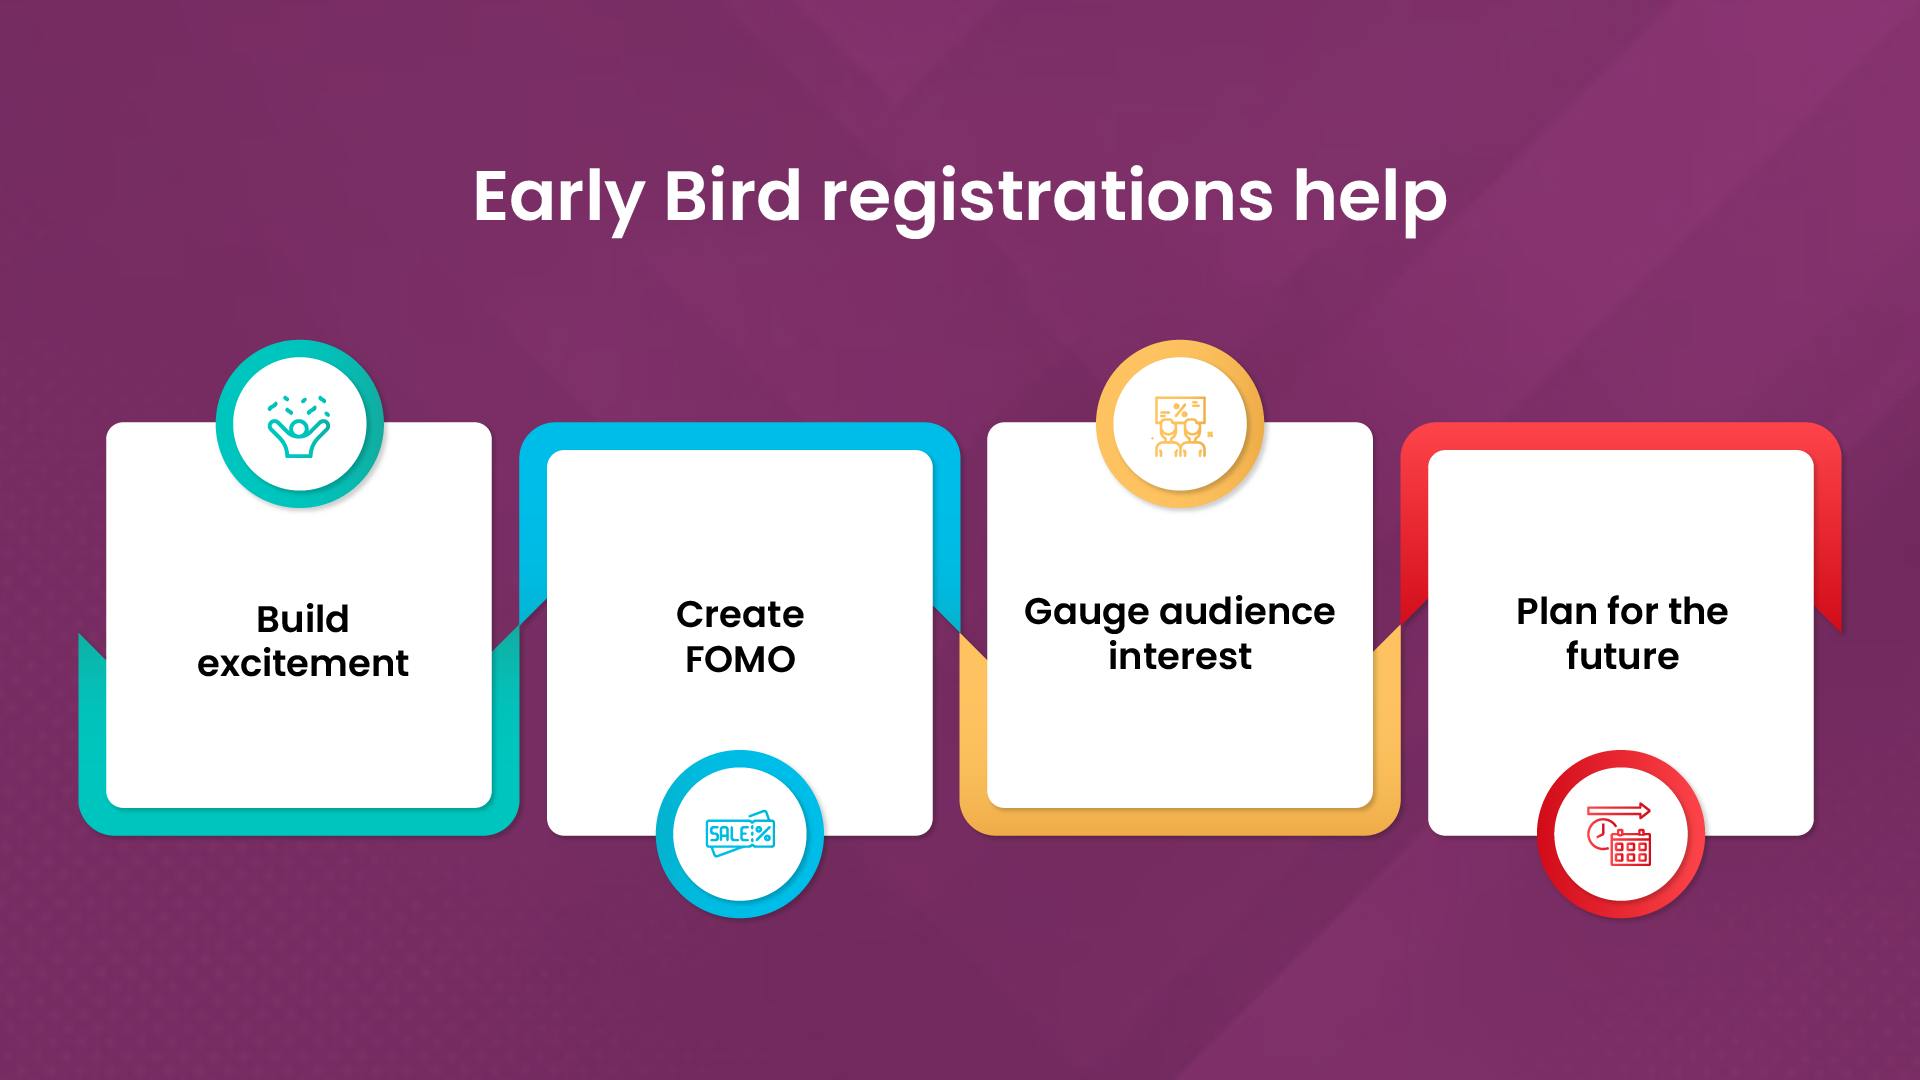 The motivation behind using Early Bird Registrations